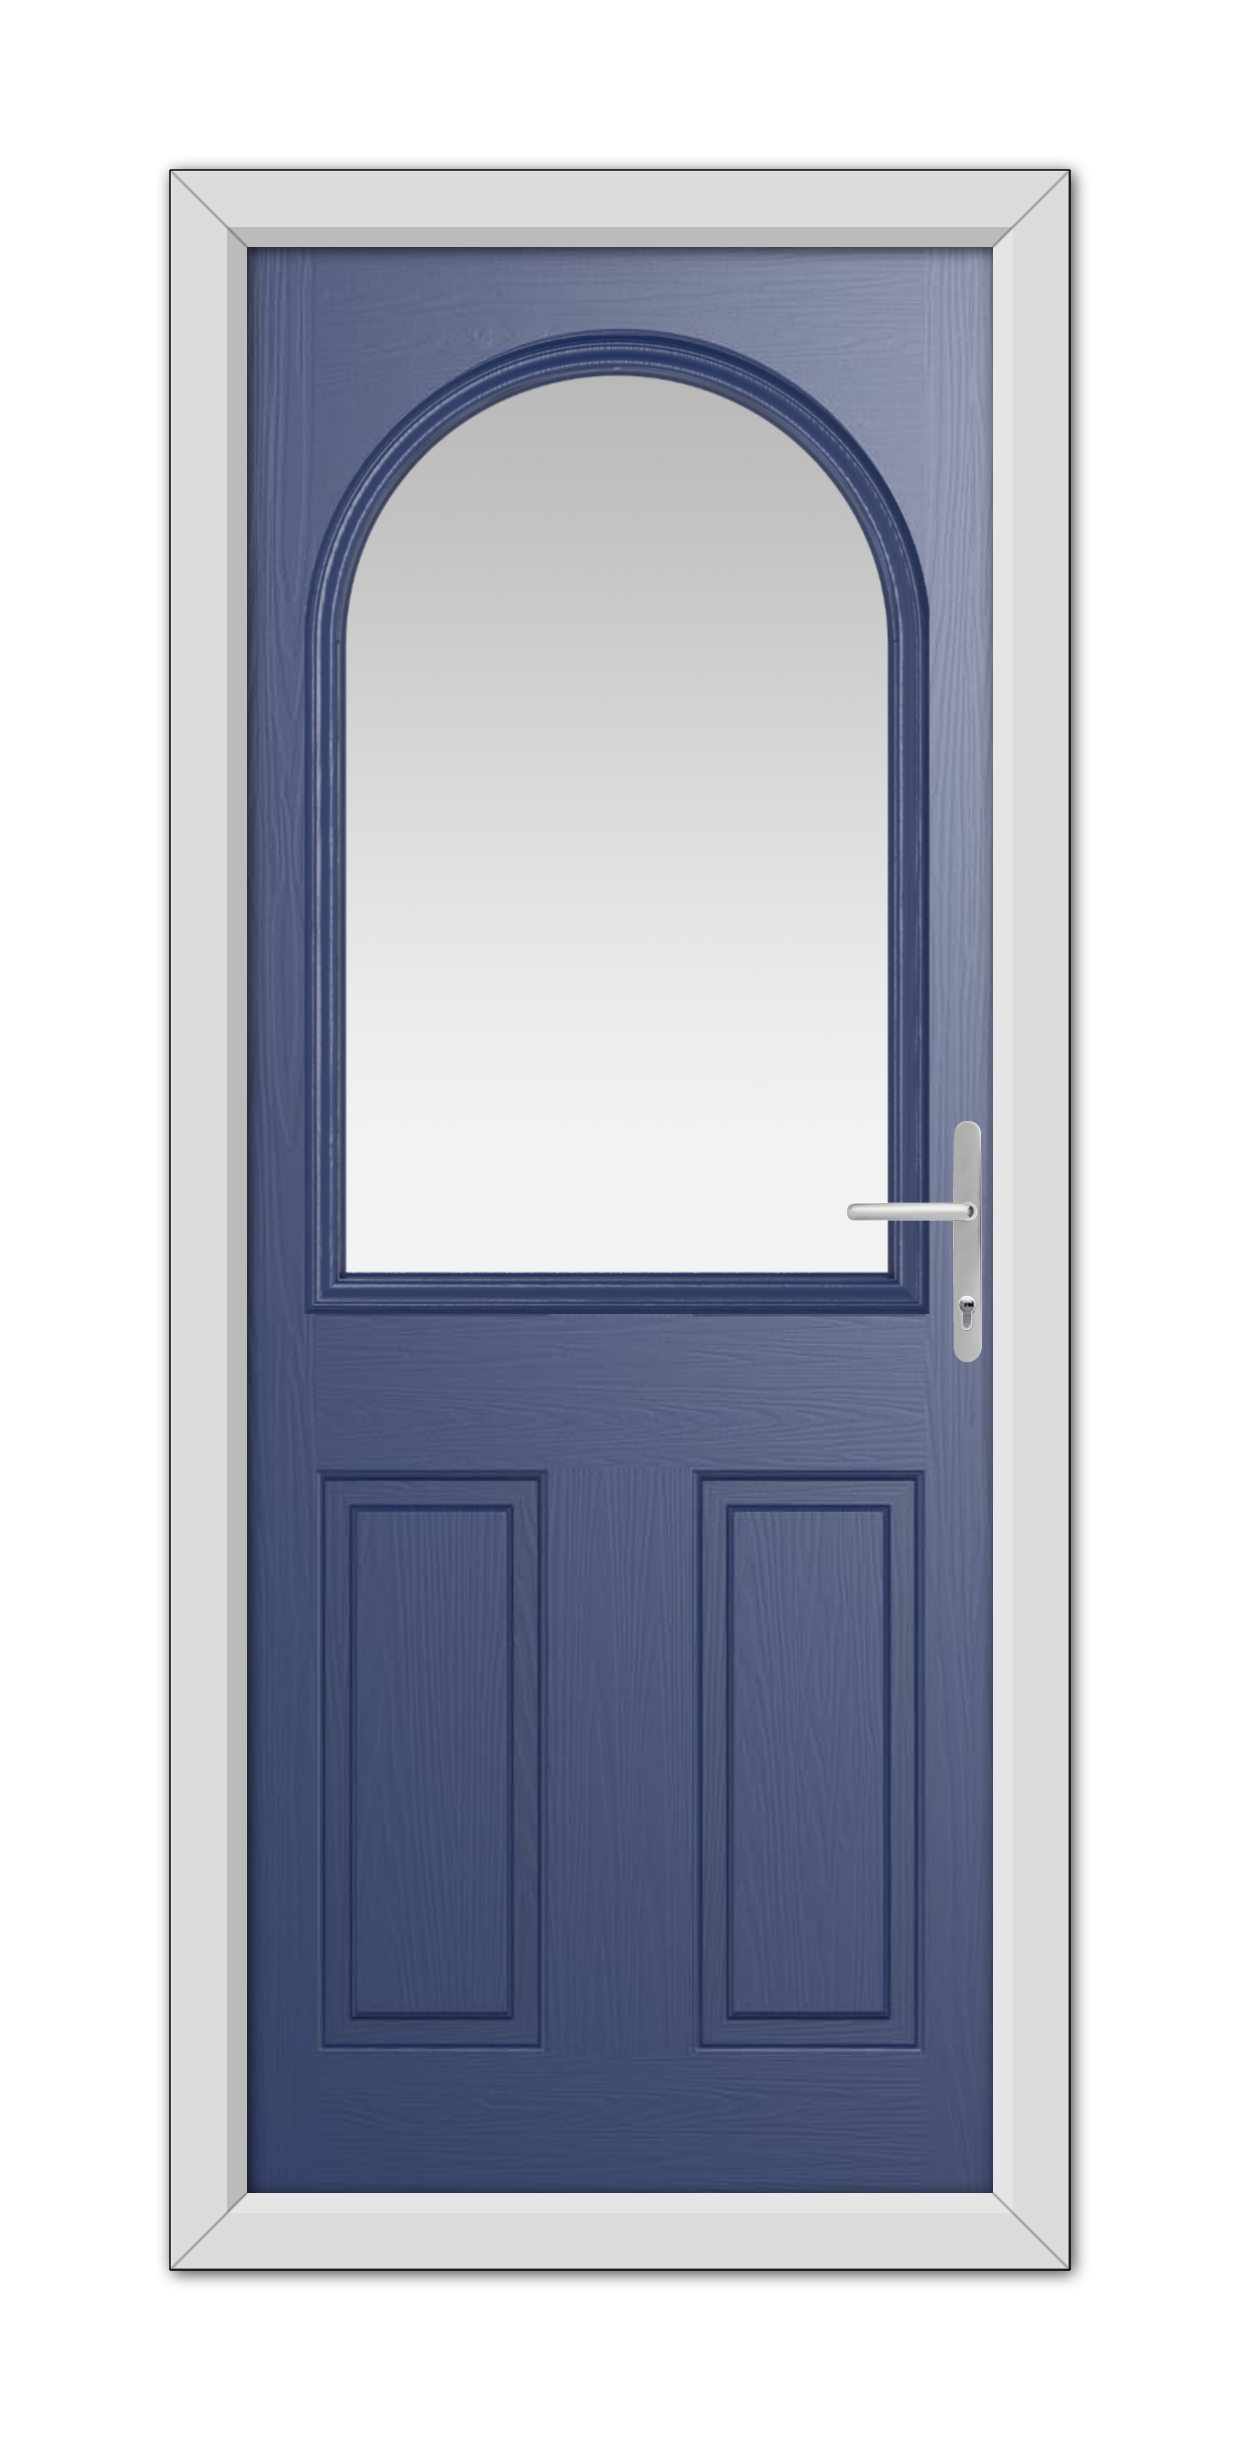 A modern Blue Grafton Composite Door 48mm Timber Core with an arched window at the top, set in a white frame, equipped with a silver handle.